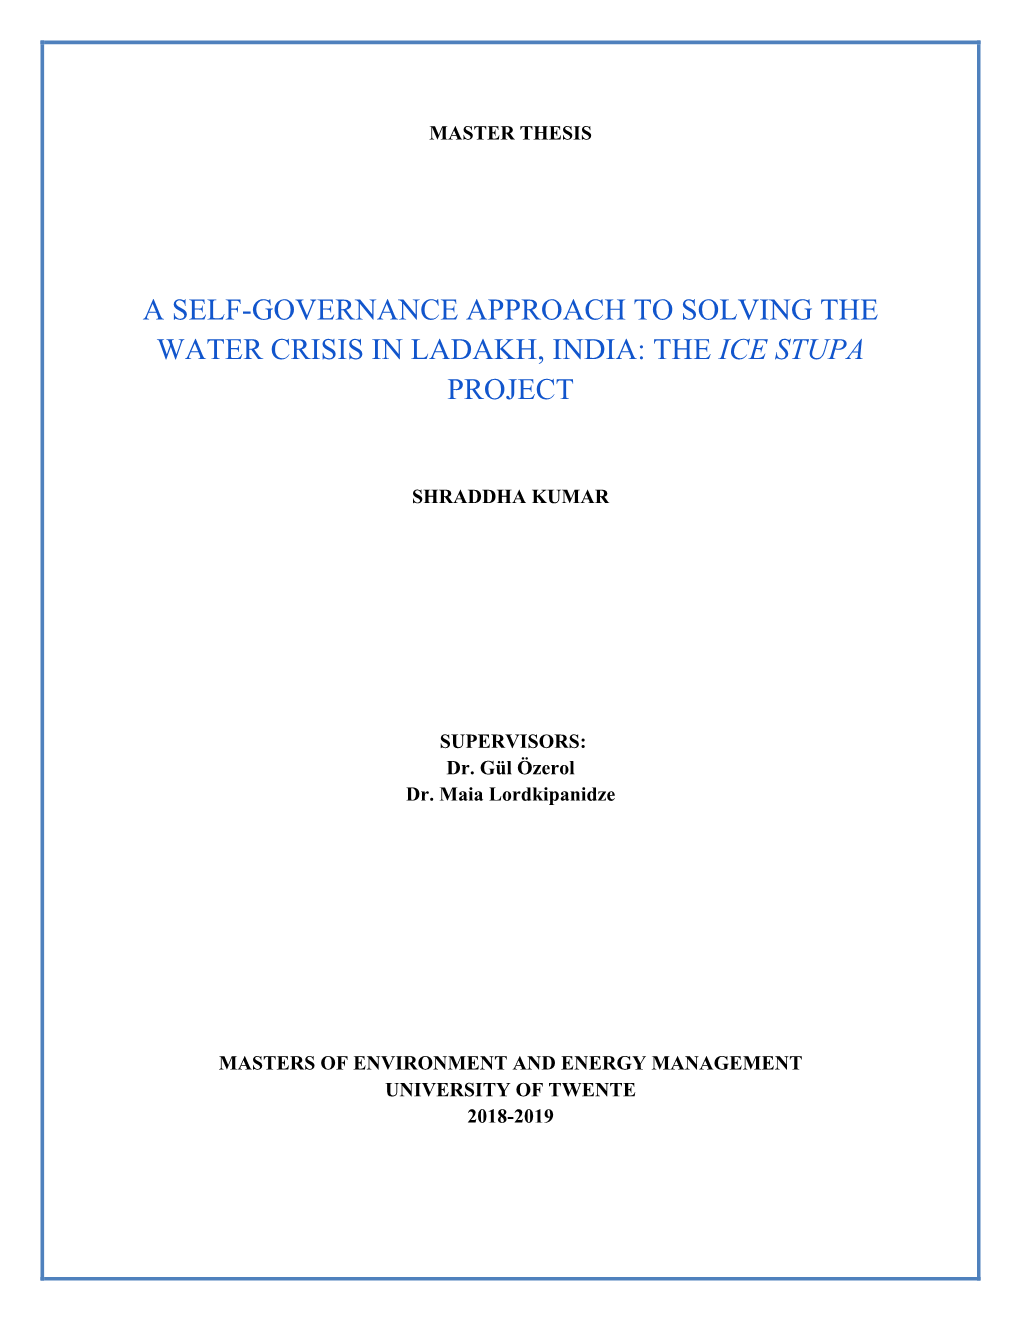 A Self-Governance Approach to Solving the Water Crisis in Ladakh, India: the Ice Stupa Project